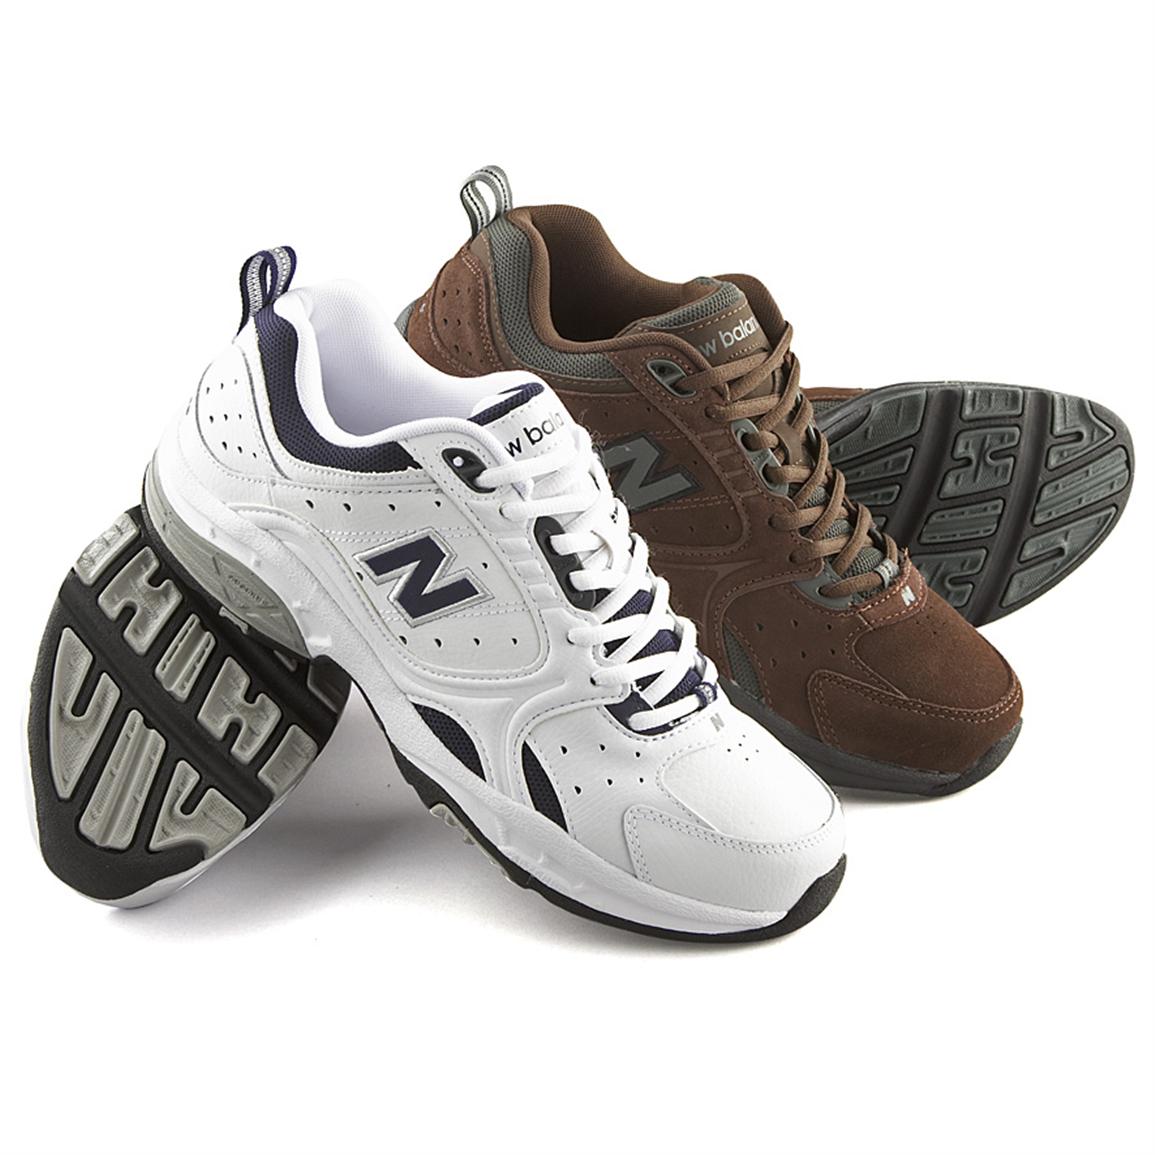 Men #39 s New Balance® MX622 Court Shoes 162141 Running Shoes Sneakers